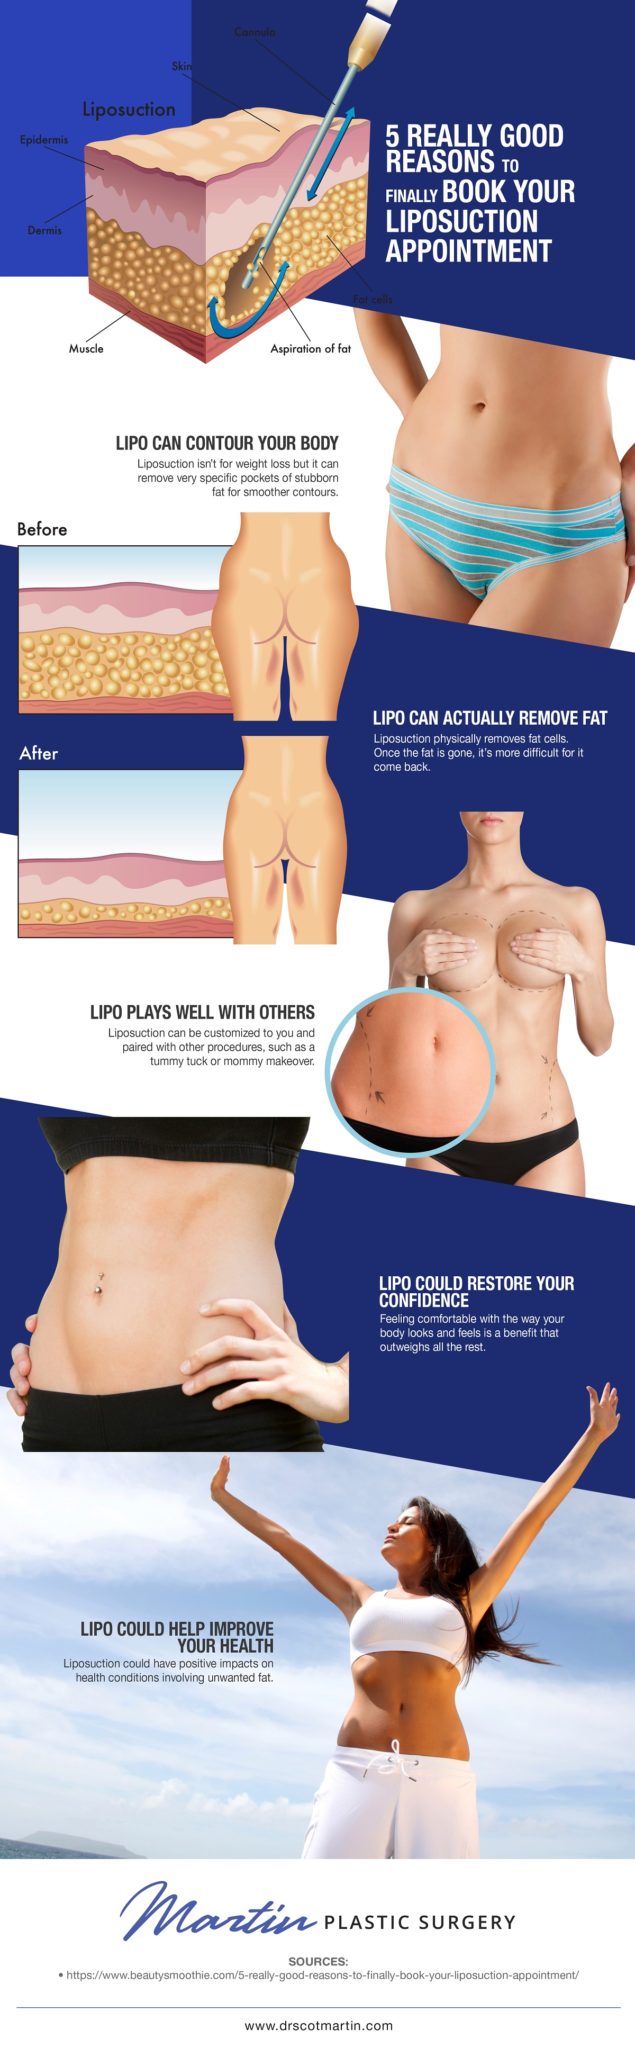 5 Really Good Reasons to Finally Book Your Liposuction Appointment  [Infographic] img 1